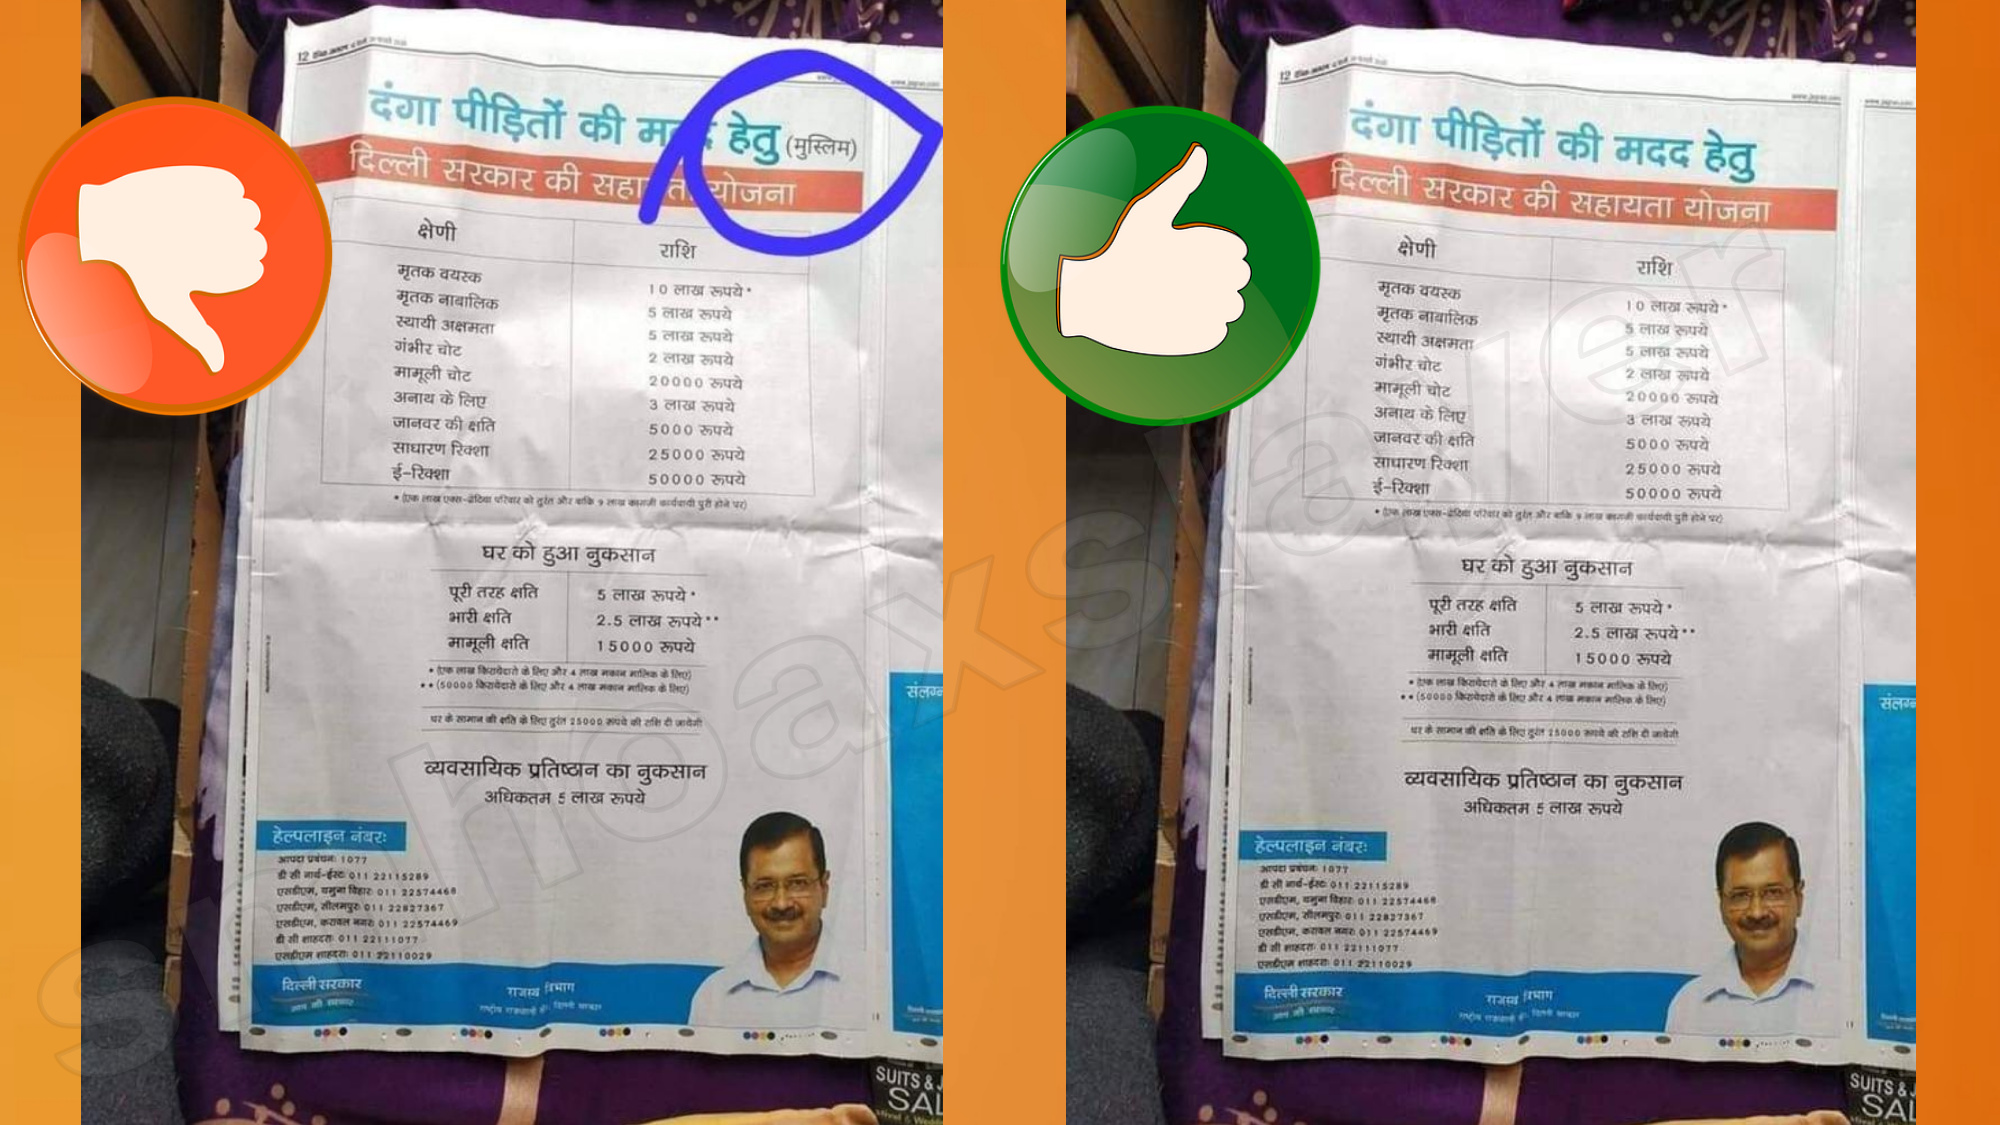 A fake image is viral claiming Delhi Govt is offering aid to Muslim riot victims only. - Swachh Social Media Abhiyaan